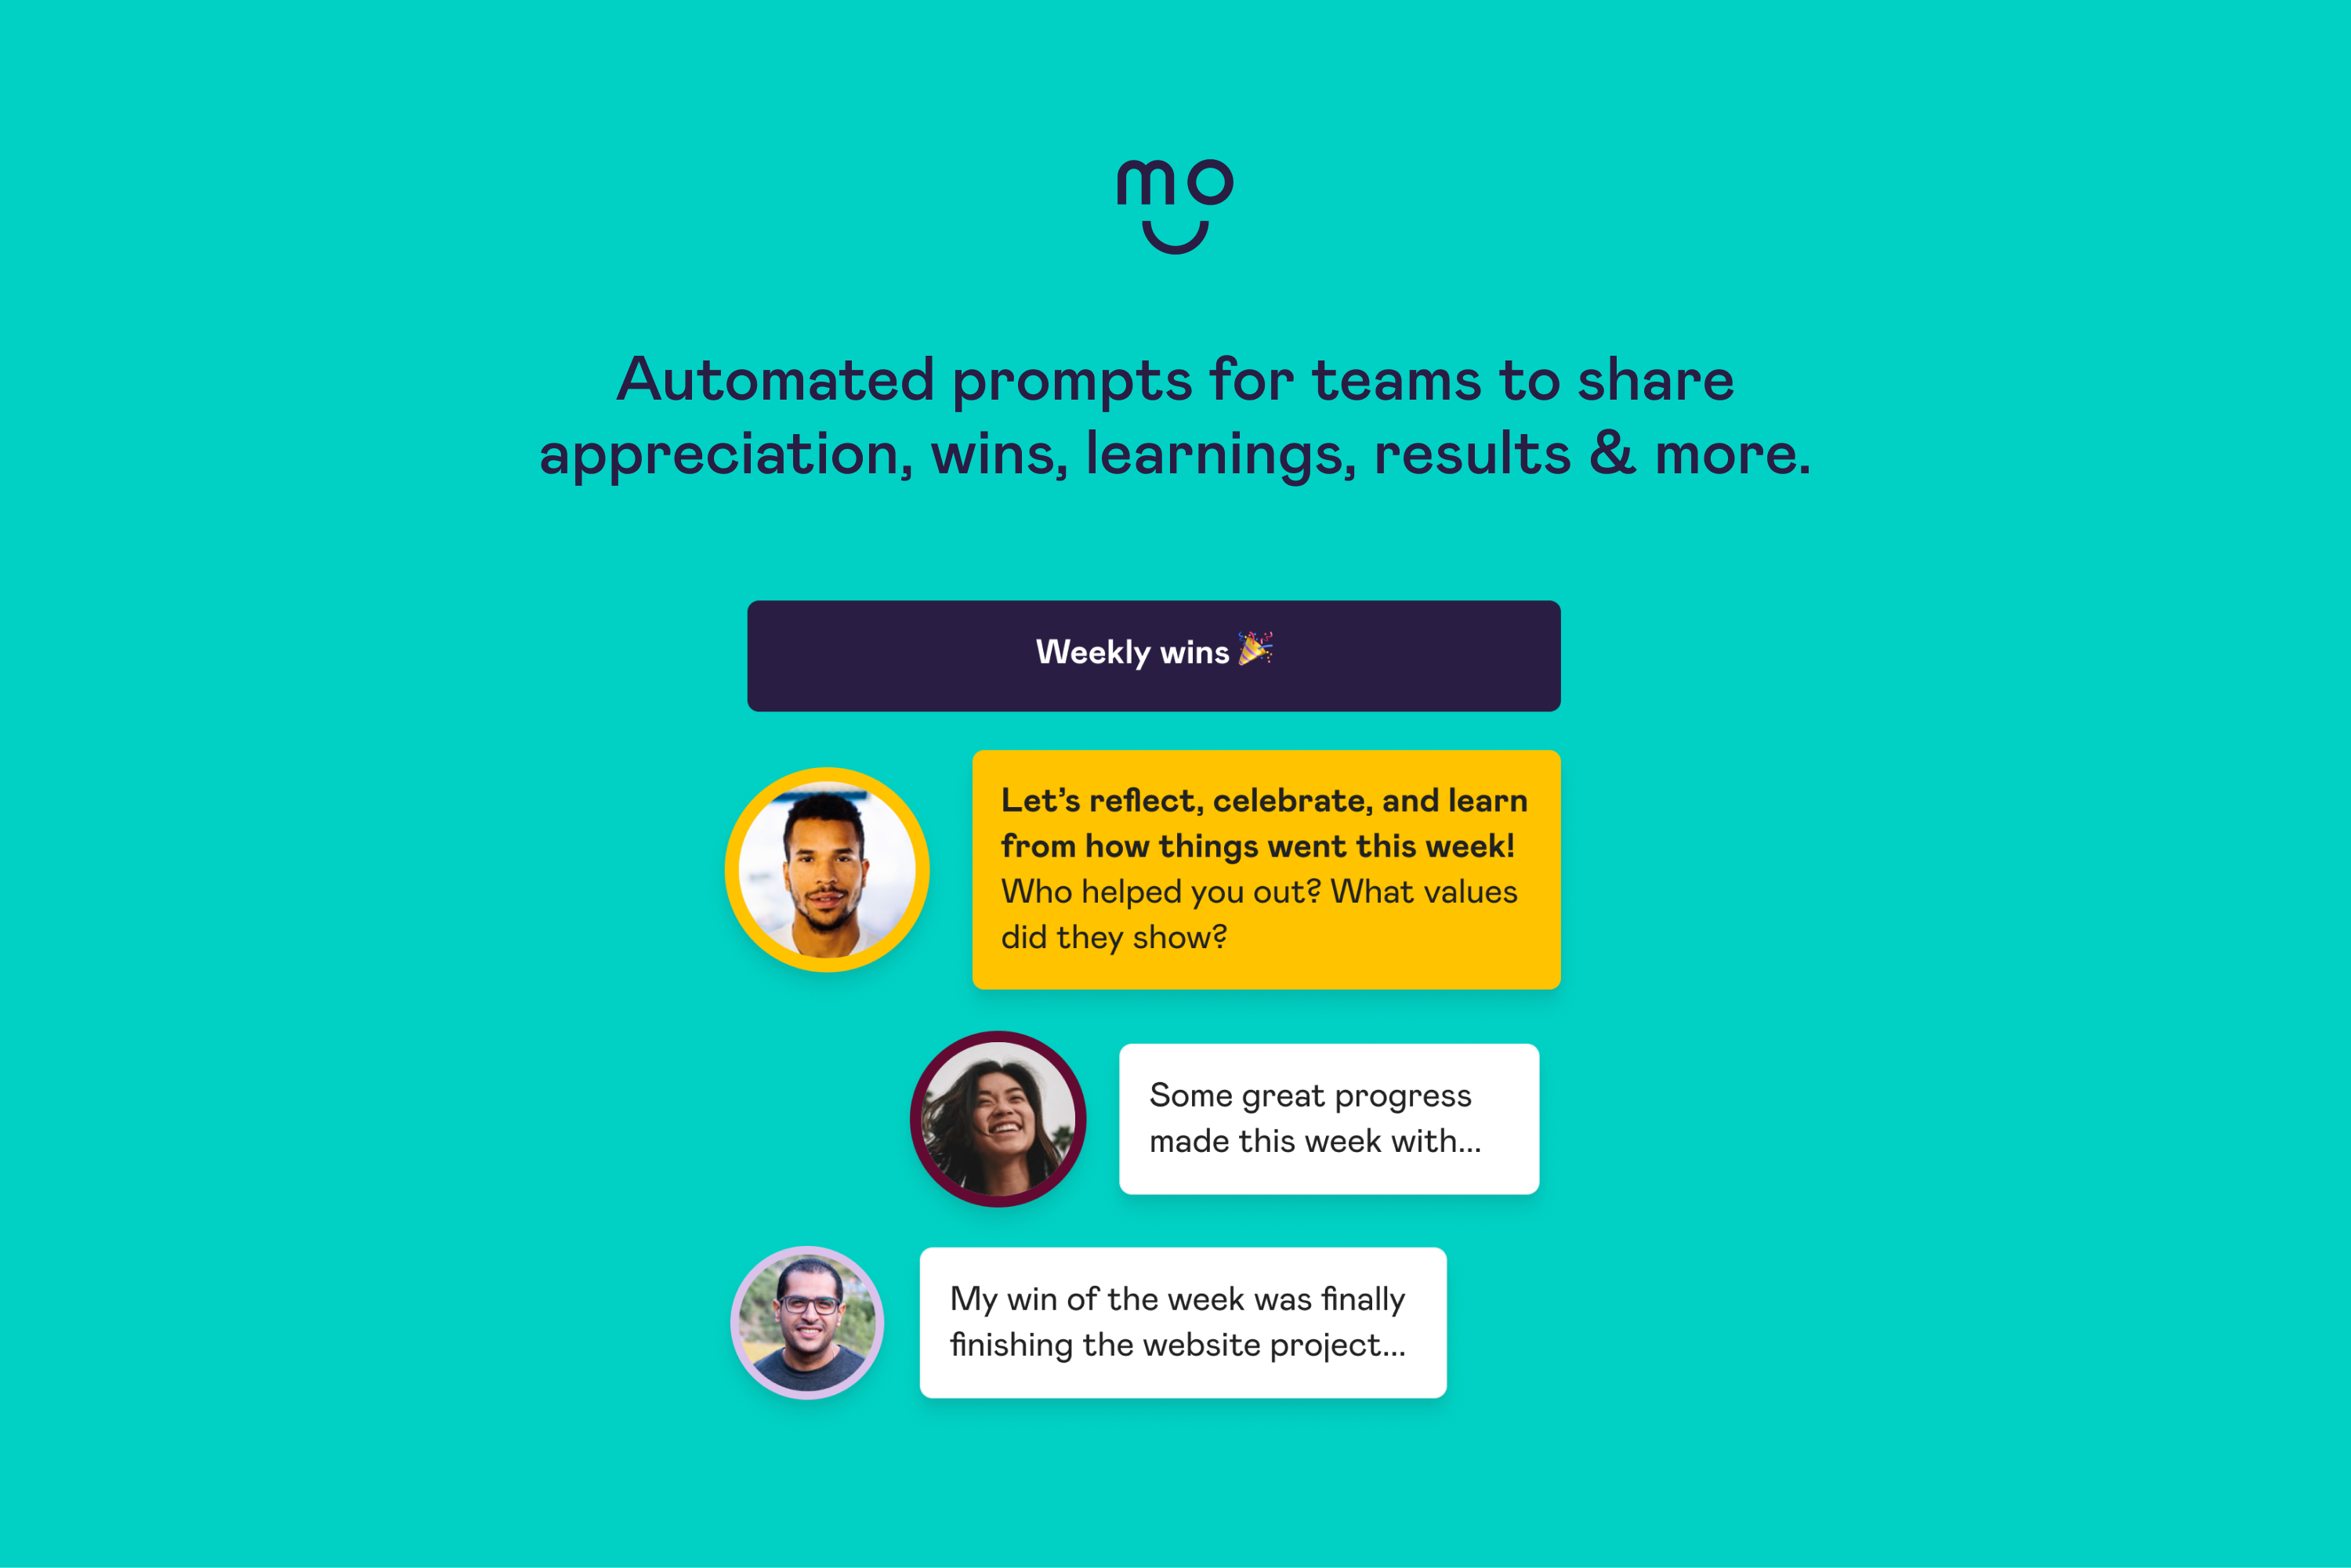 Boosts: prompt teams to share posts on topics like top priorities or weekly wins